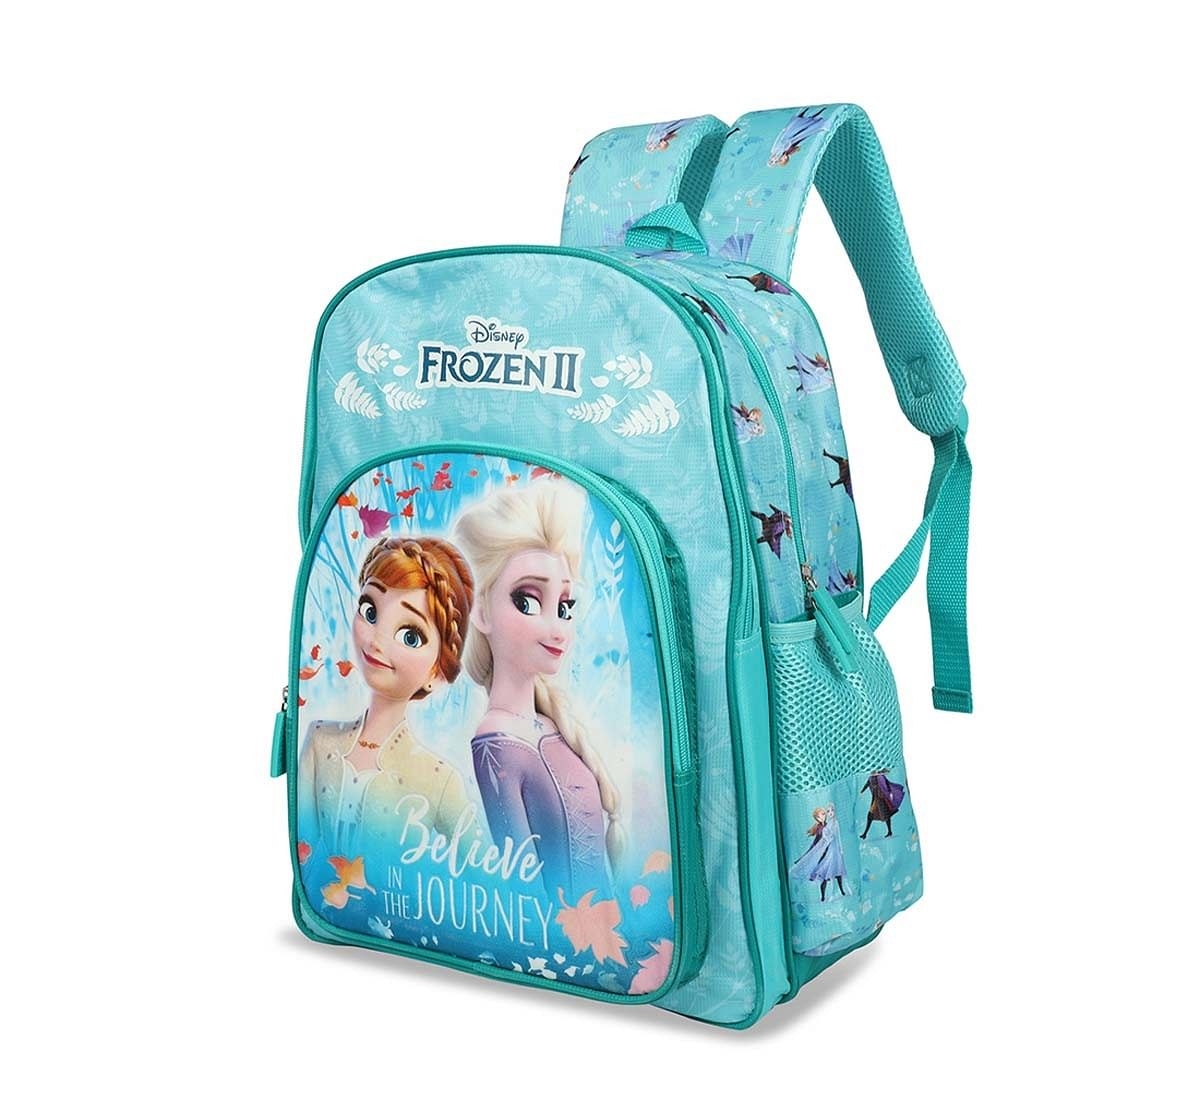 Excel Production Frozen2 Believe In The Journey School Bag 46 Cm Bags for Age 10Y+ (Turquoise)